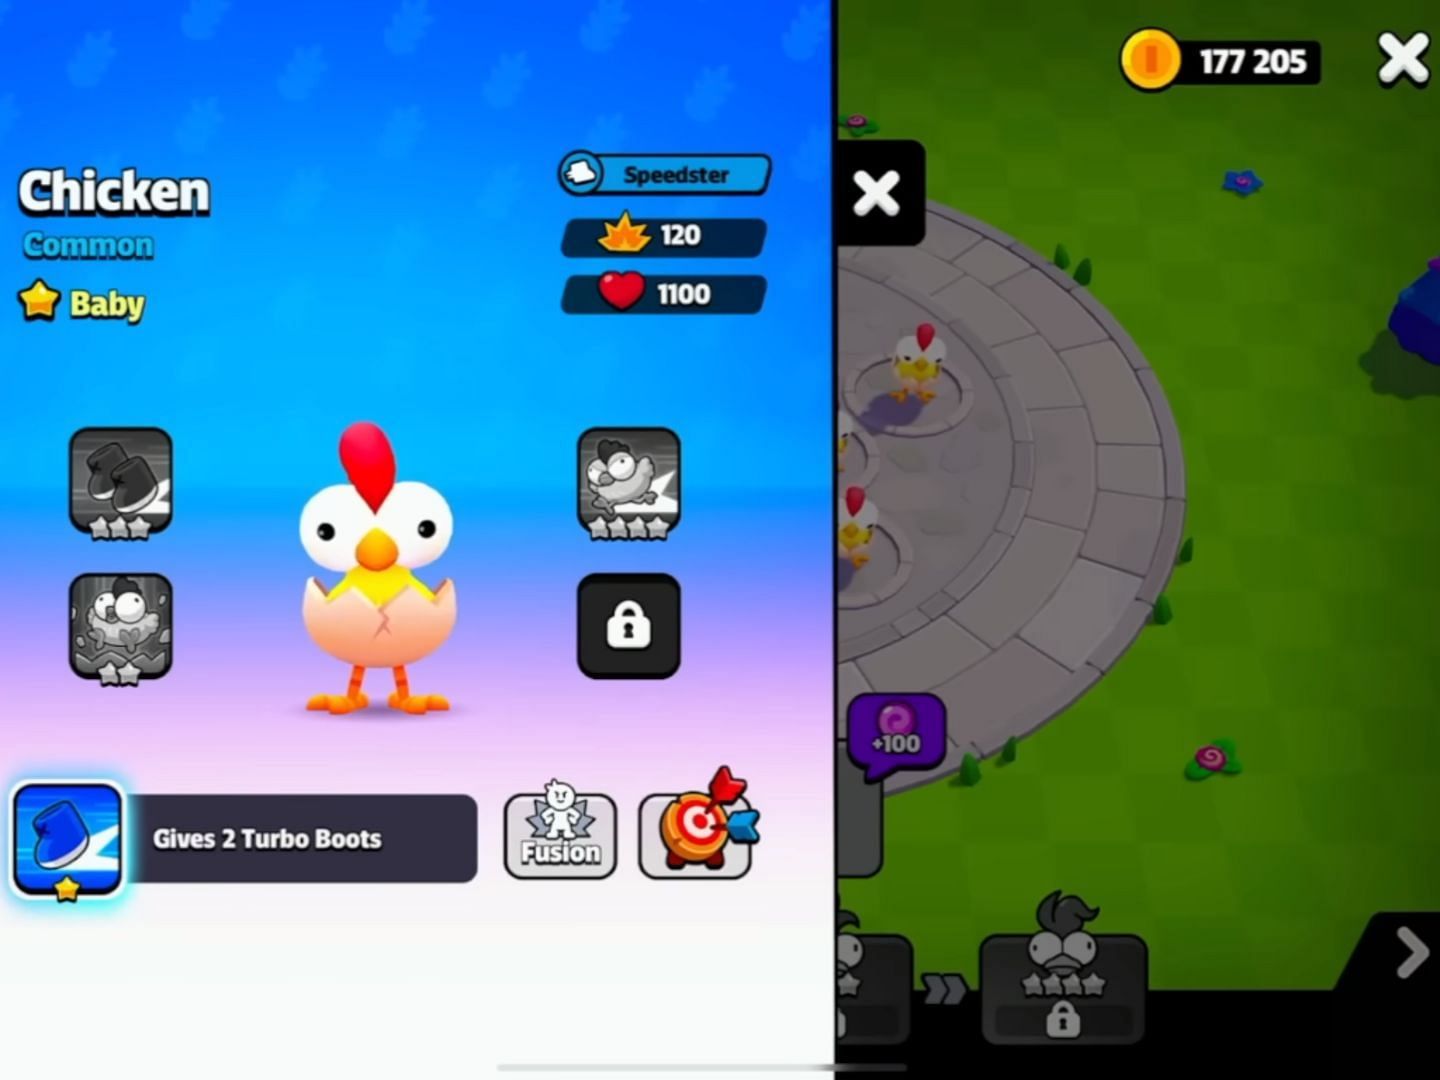 Chicken Baby form stat change (Image via Supercell)